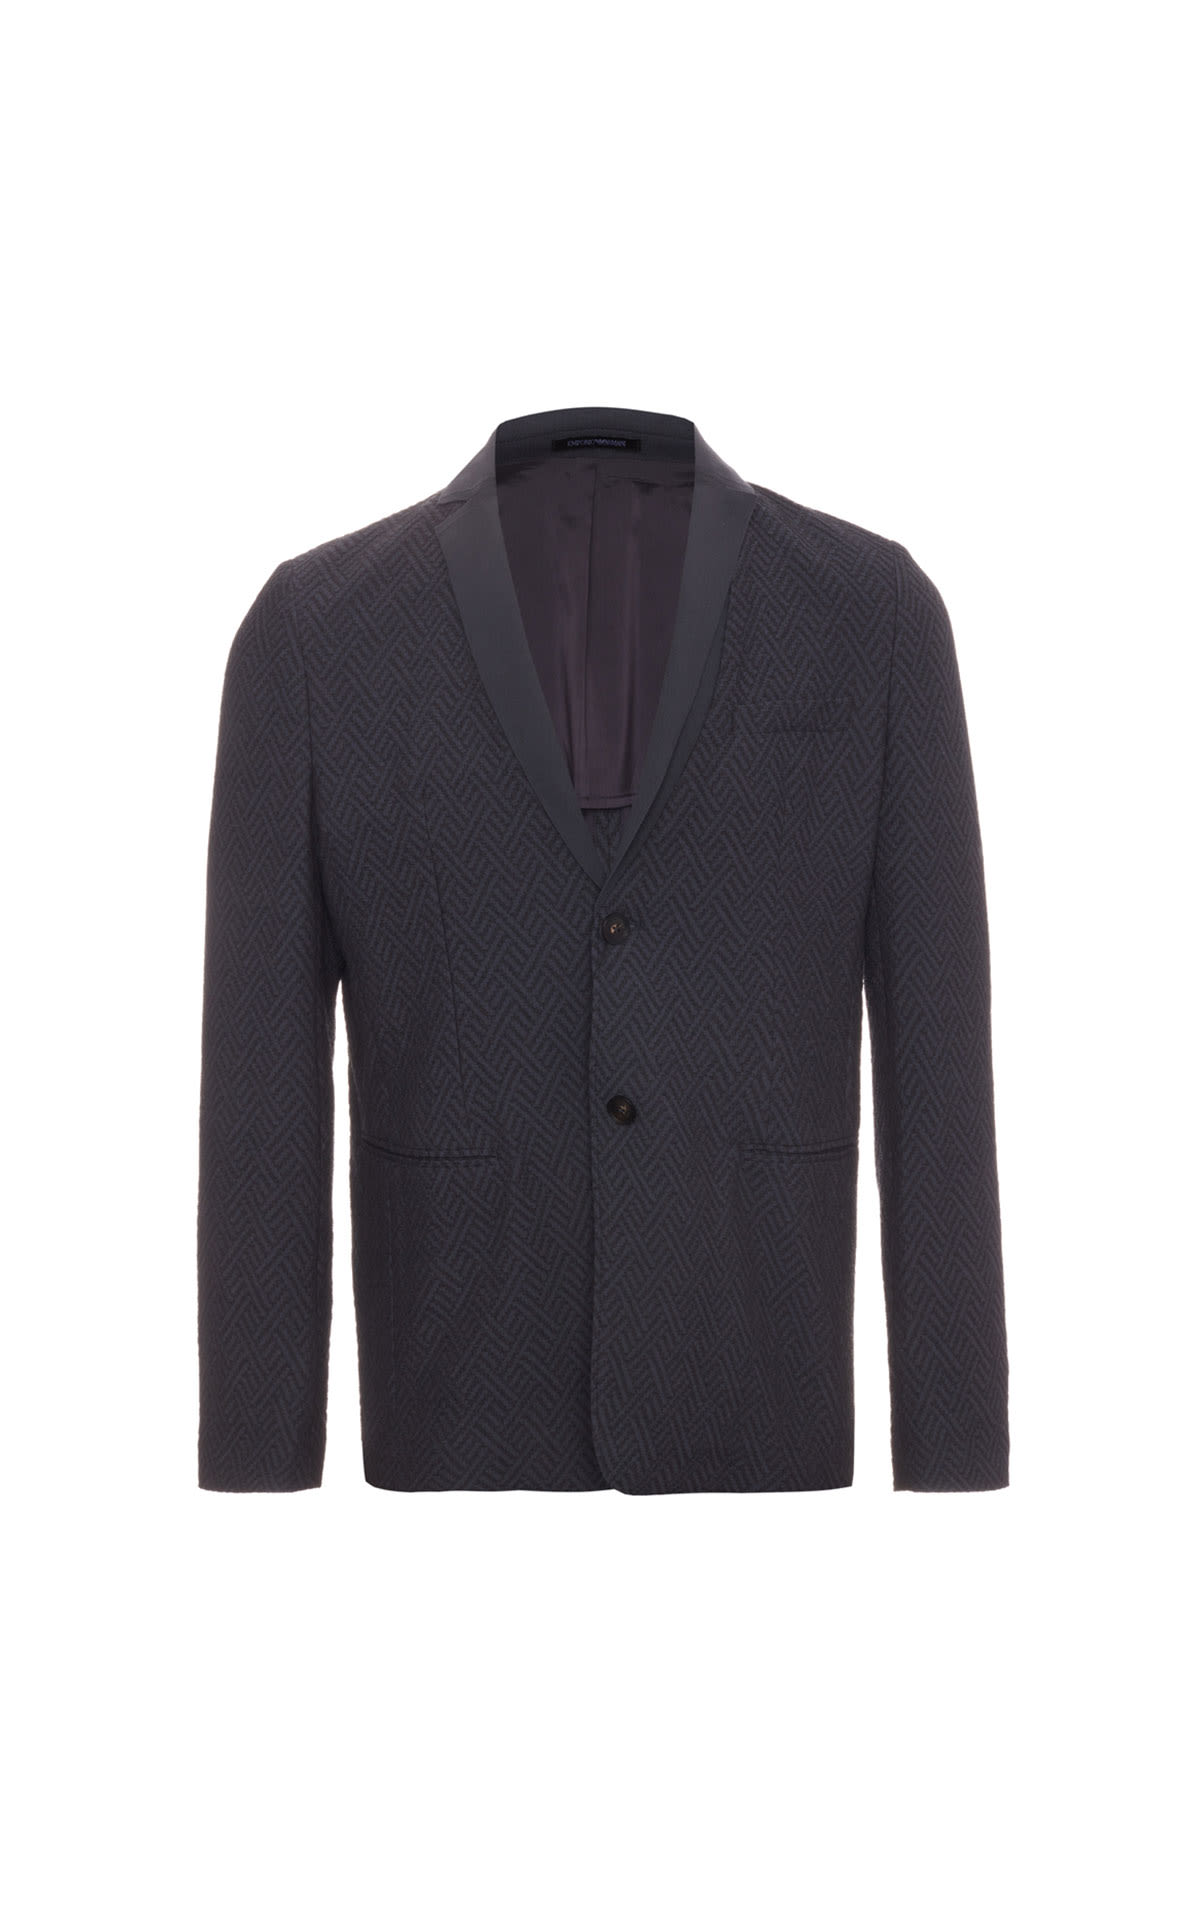 Armani Knitted jacket from Bicester Village